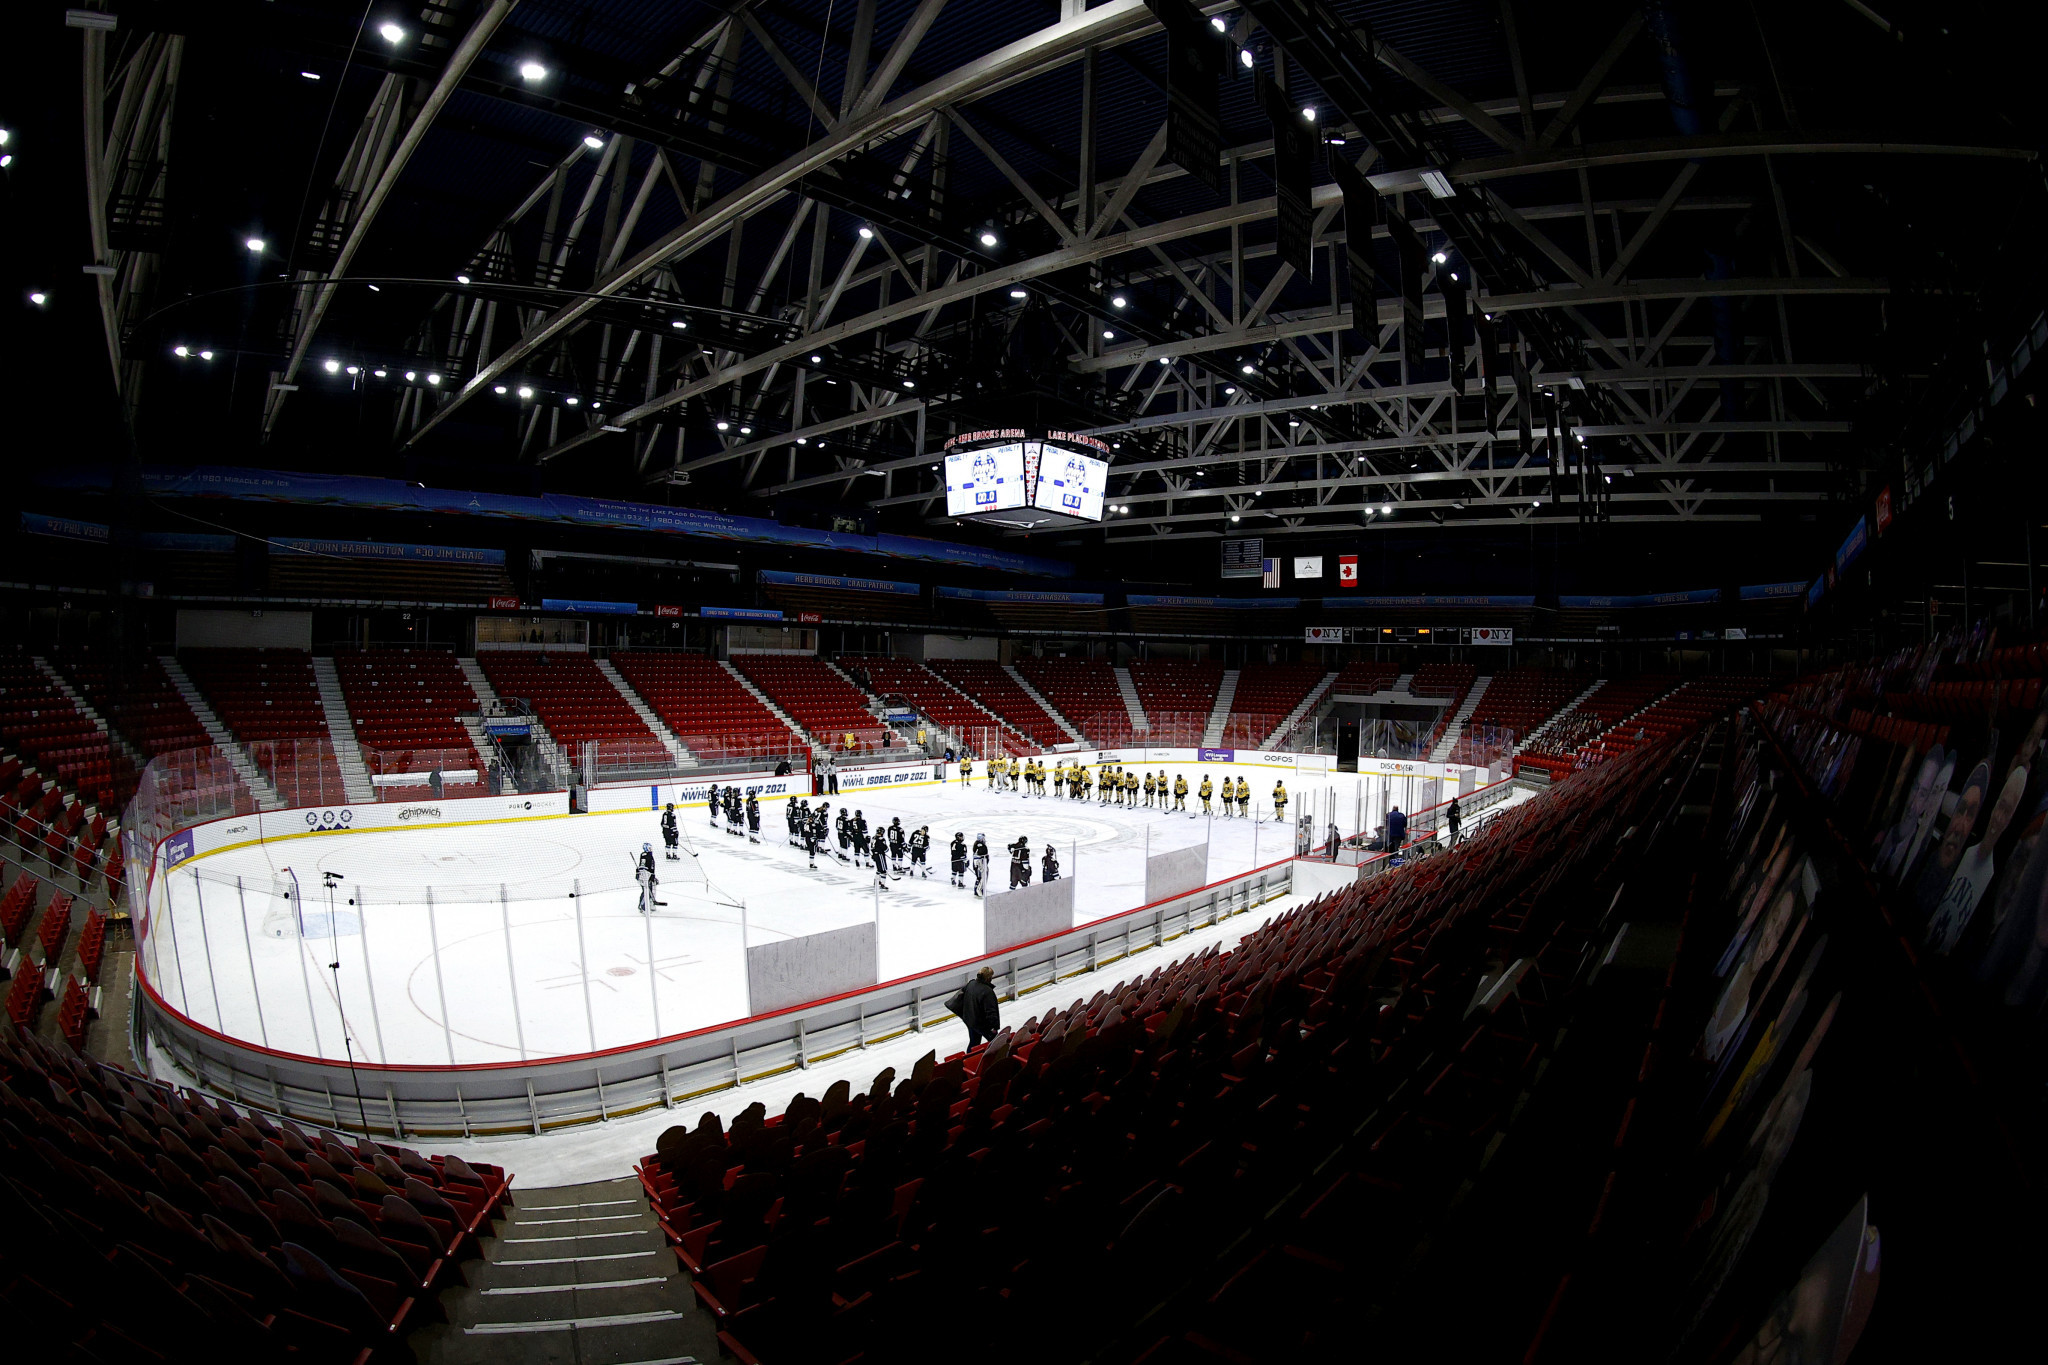 Lake Placid's Olympic Center is set to act as the main venue for the 2023 FISU World University Games ©Getty Images